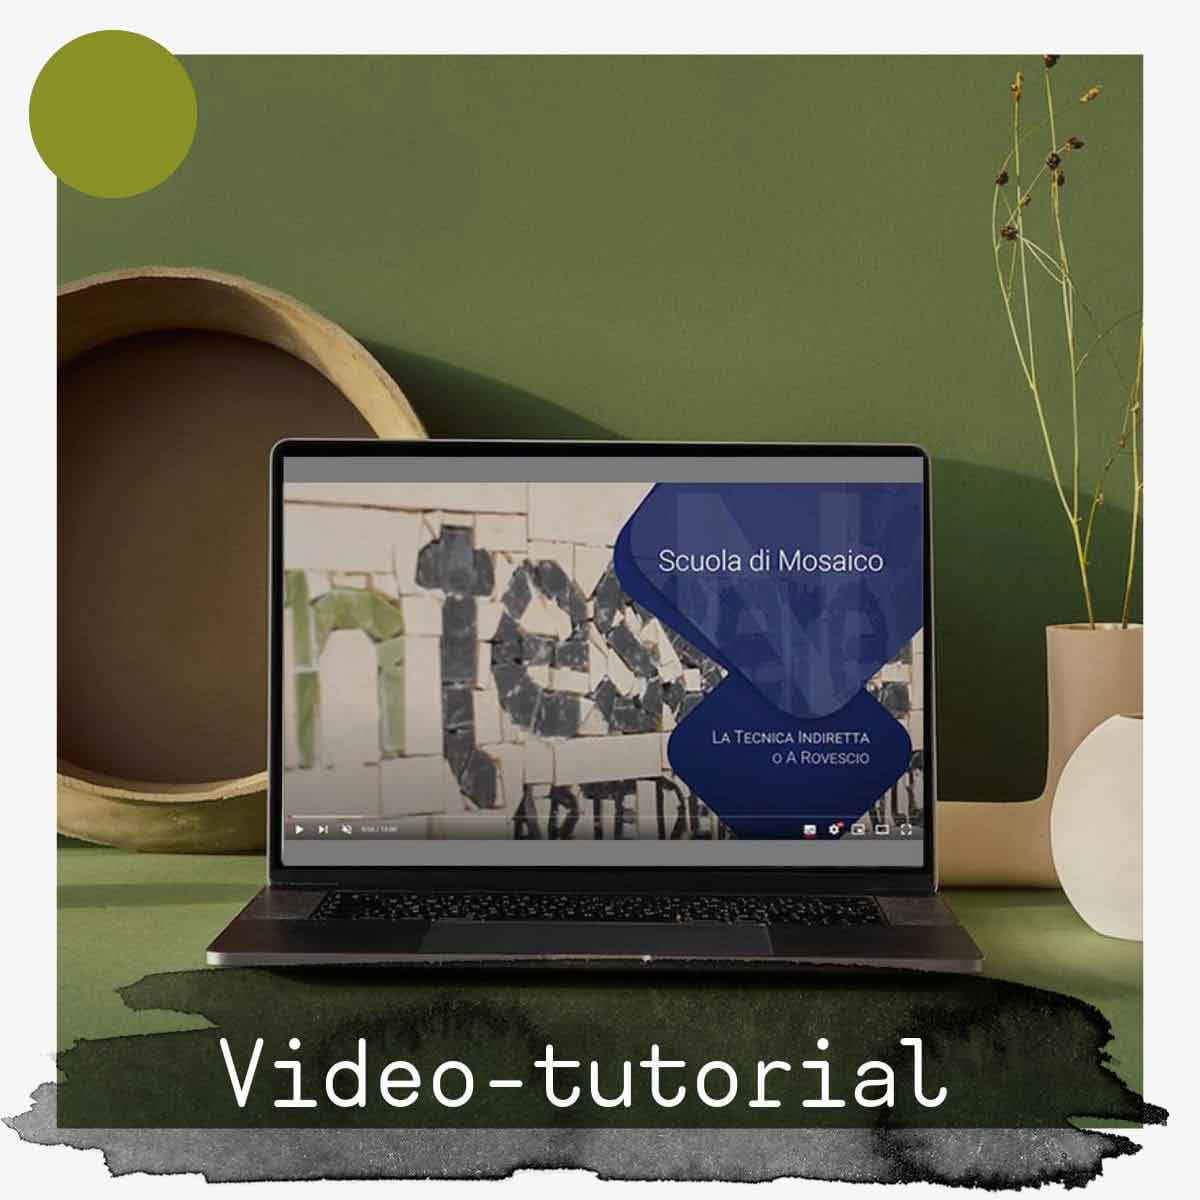 PROFESSIONAL MOSAIC COURSE (video lessons + 8 mosaic kits)